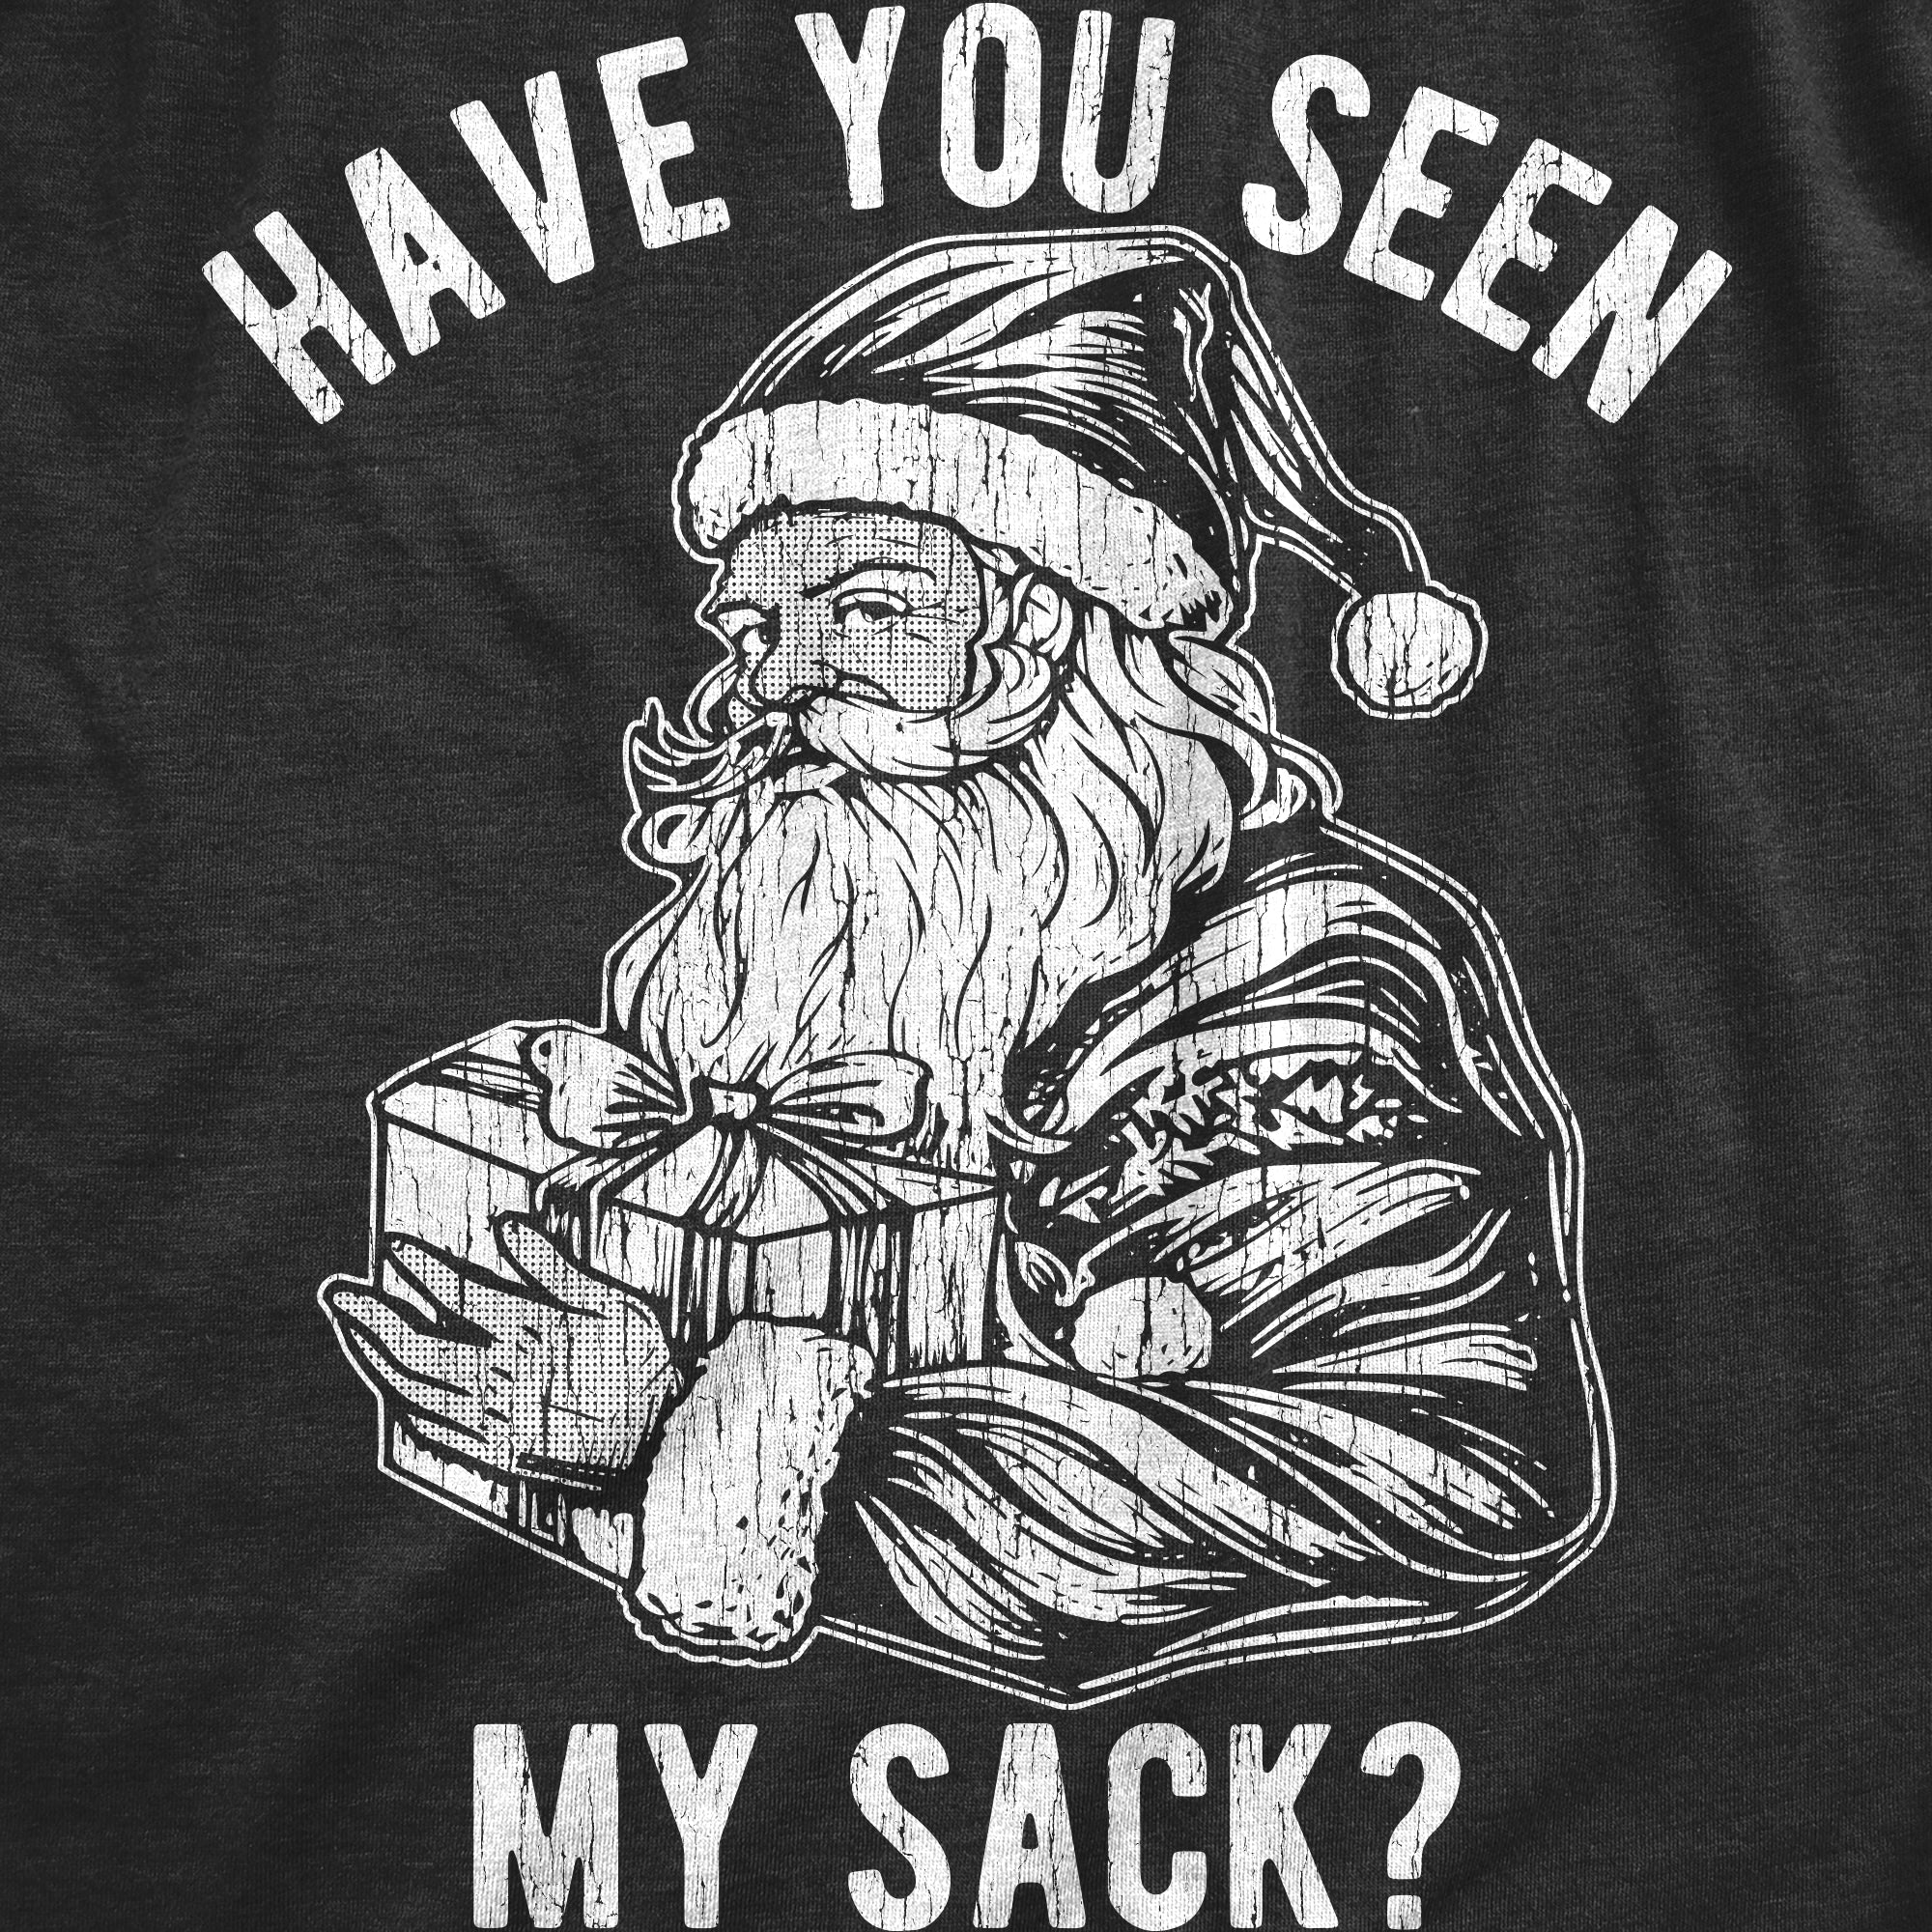 Funny Heather Black - Seen My Sack Have You Seen My Sack Mens T Shirt Nerdy Christmas Sex Tee